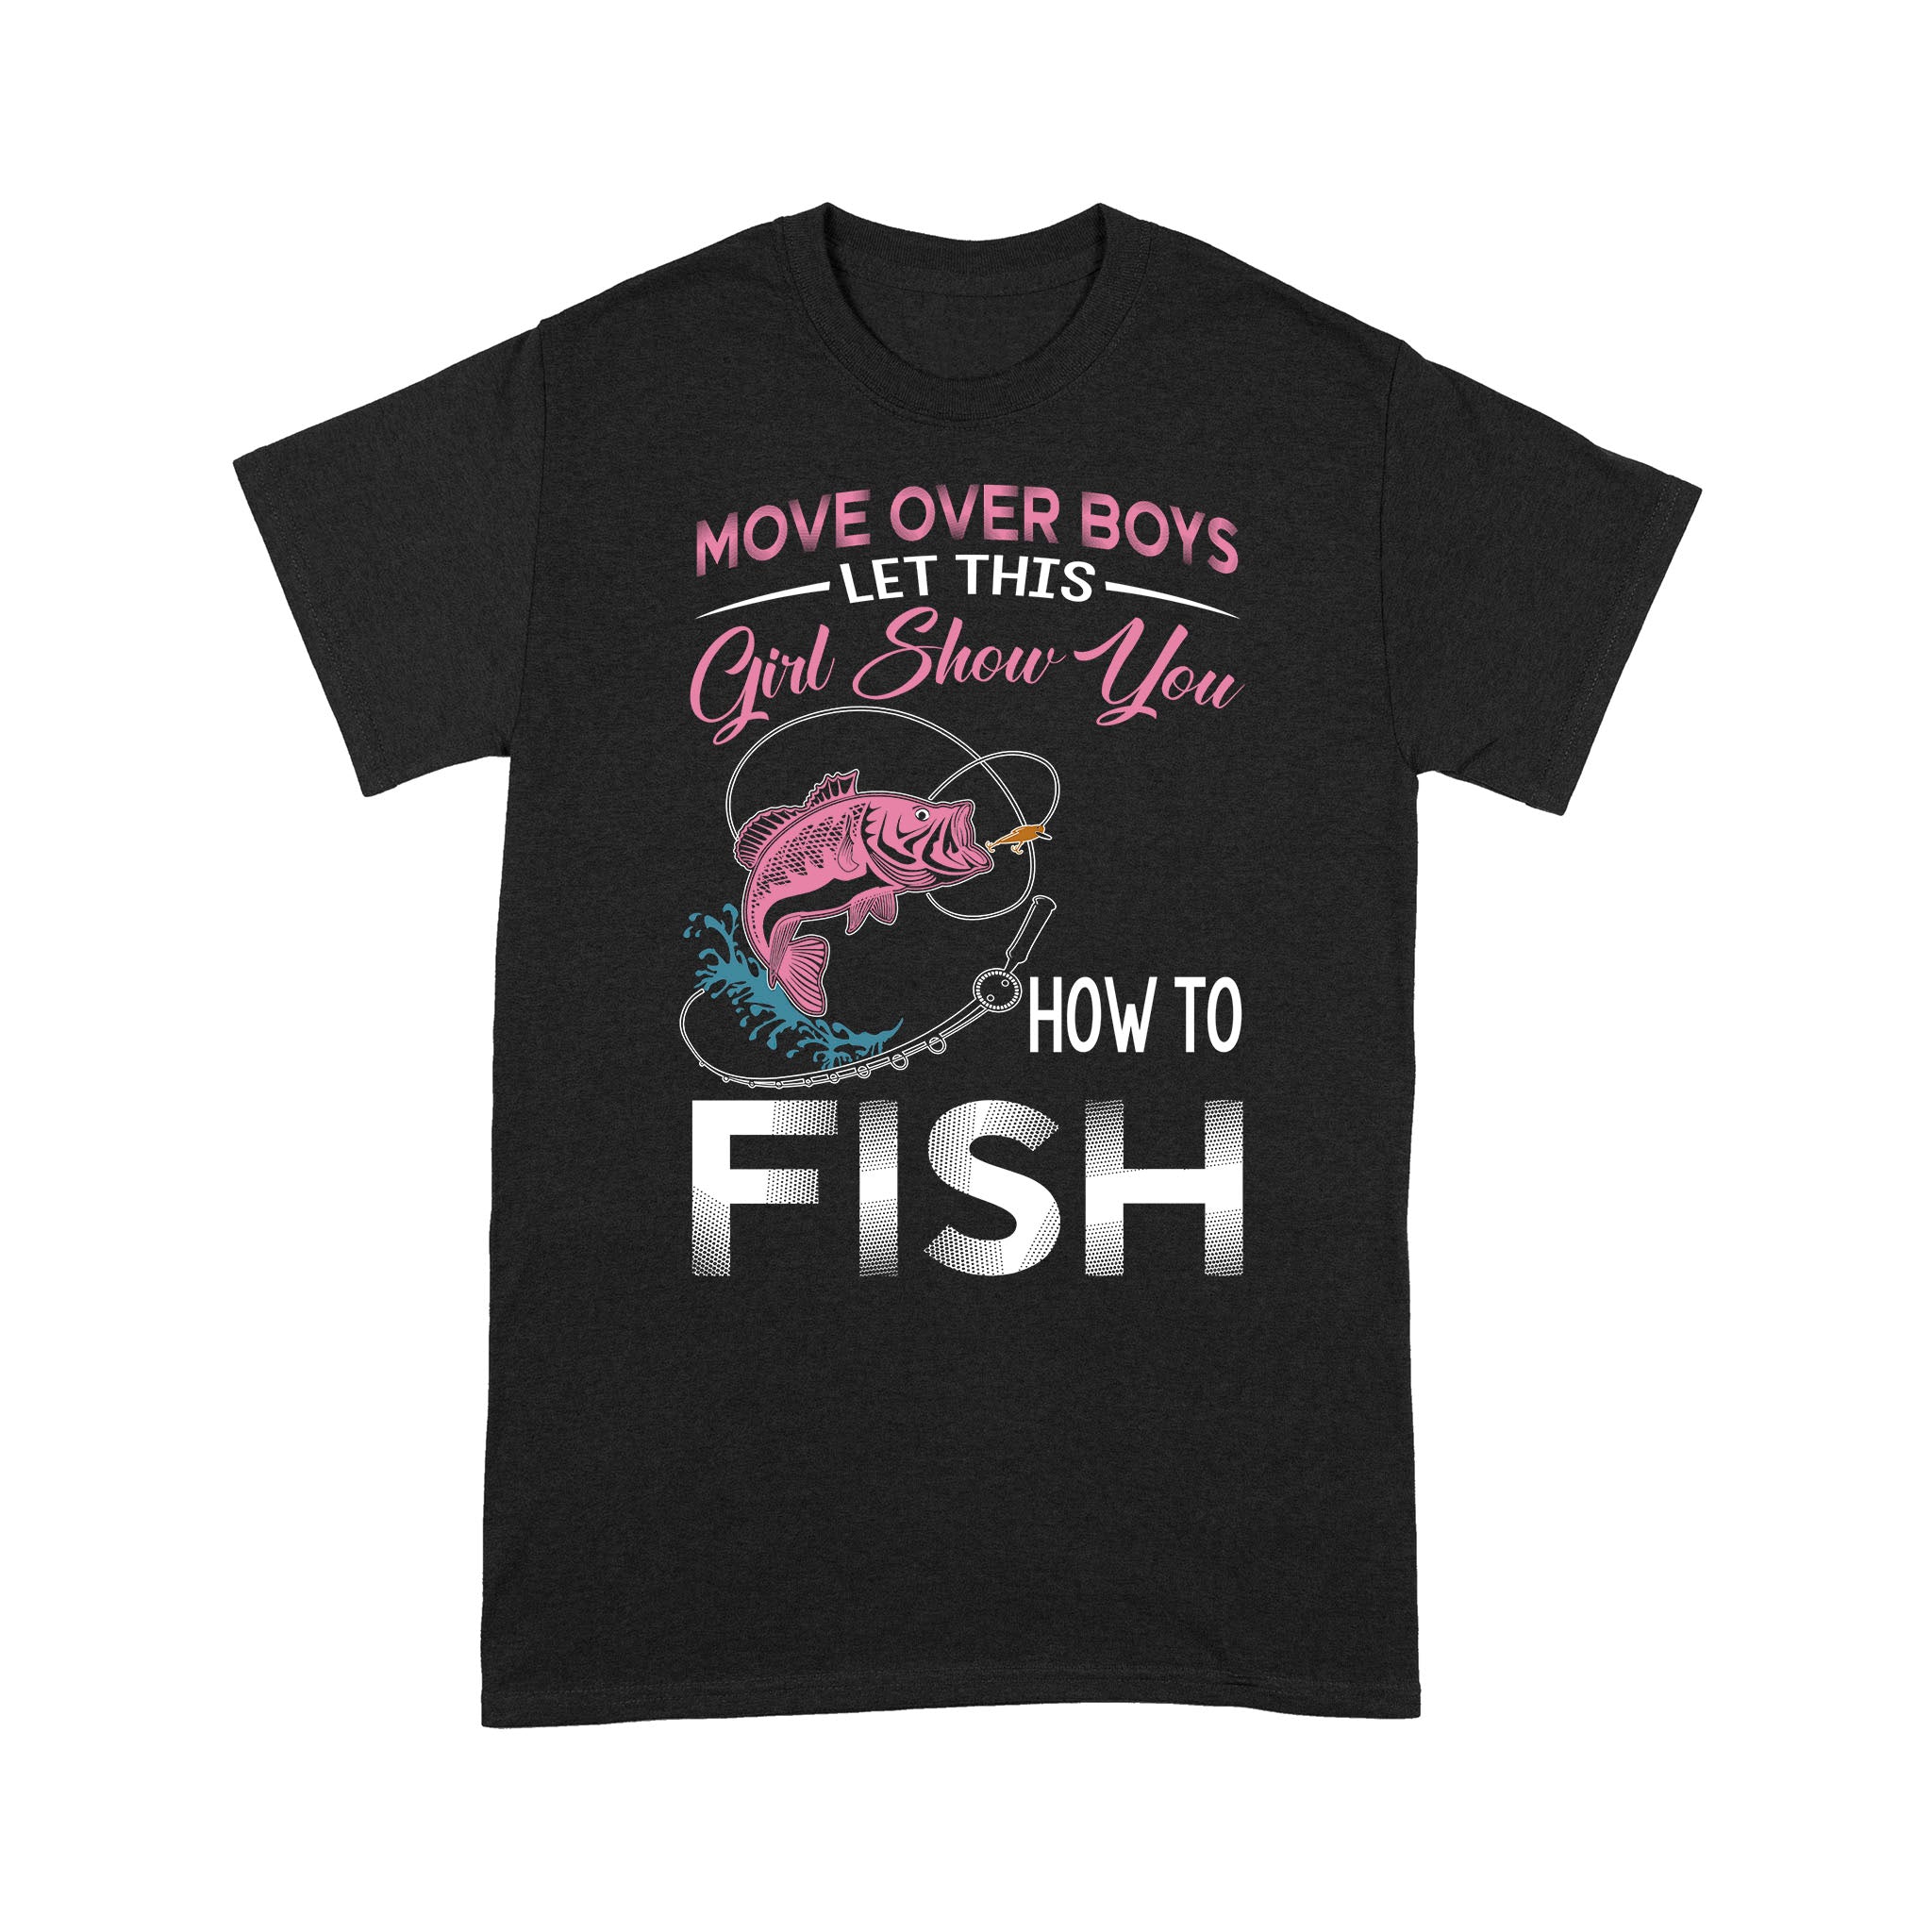 Move over boys let this girl show you how to fish pink women